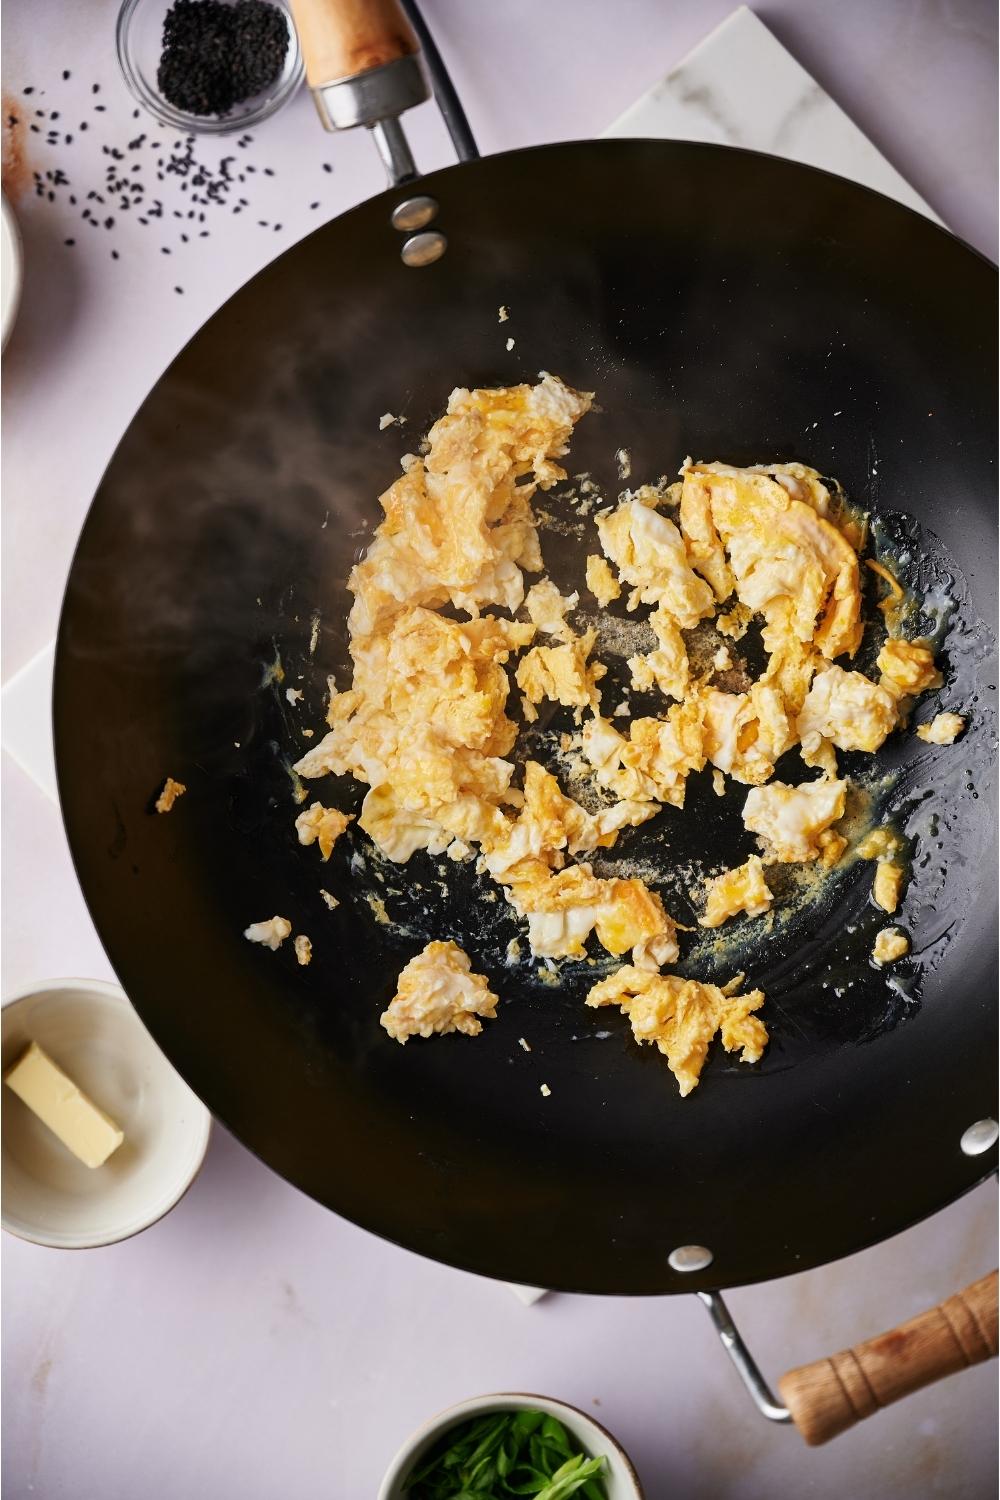 A wok with freshly scrambled eggs cooking. The wok is on a grey counter and there are bowls of sesame seeds, butter, and chopped green onions next to the wok.